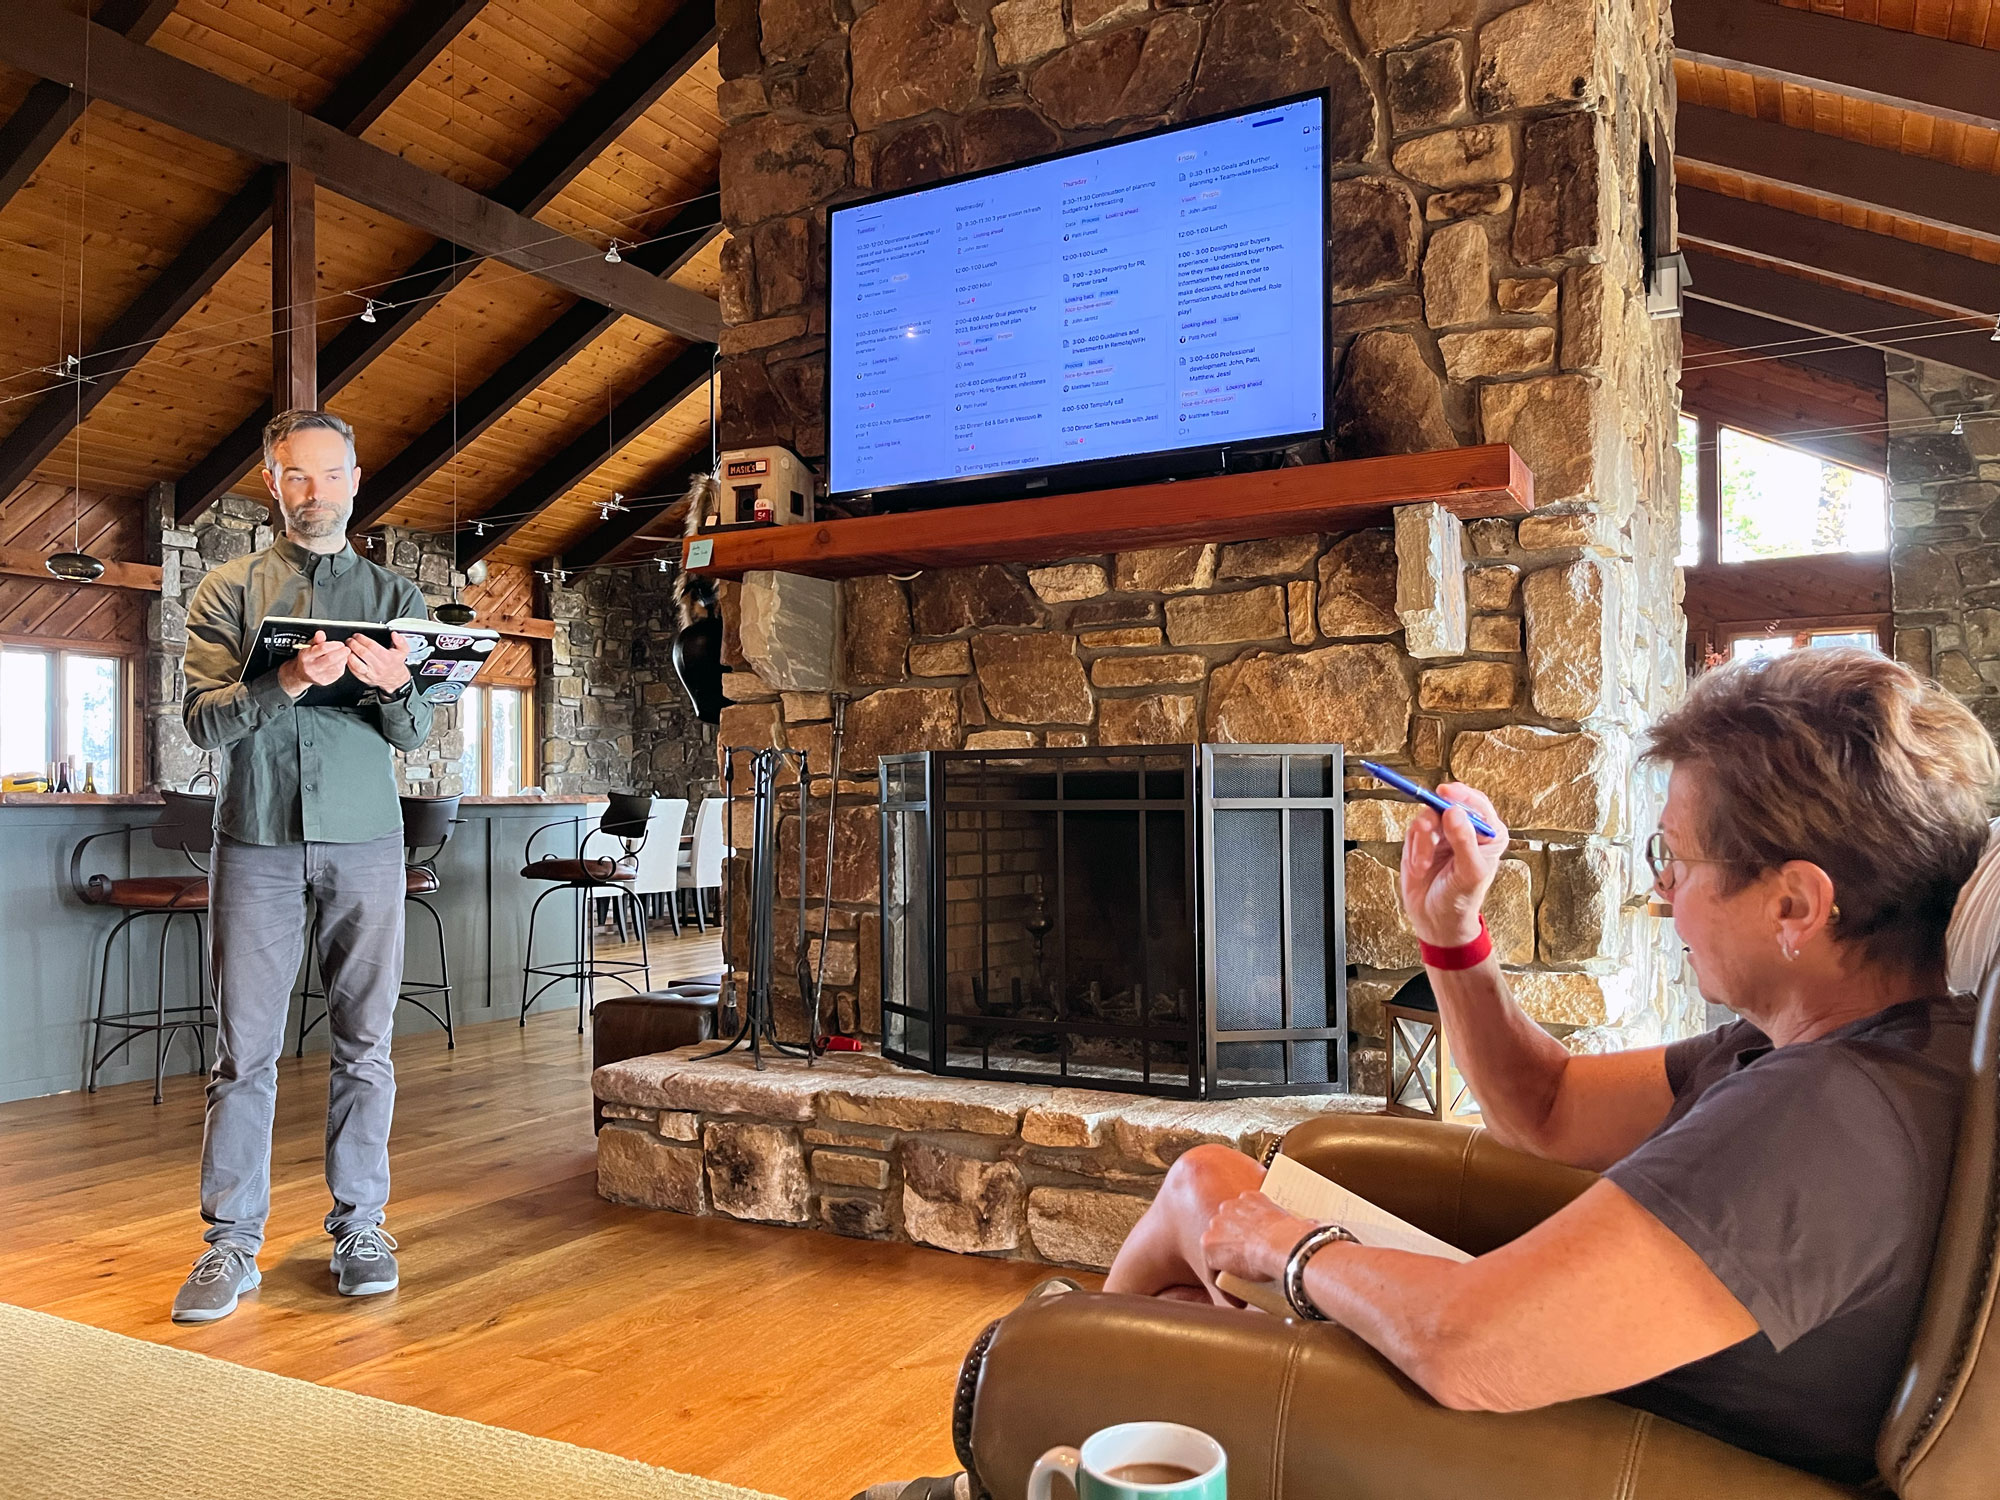 Matthew Tobiasz making a presentation to Patti Purcell in front of fireplace at Sightglass team offsite retreat.